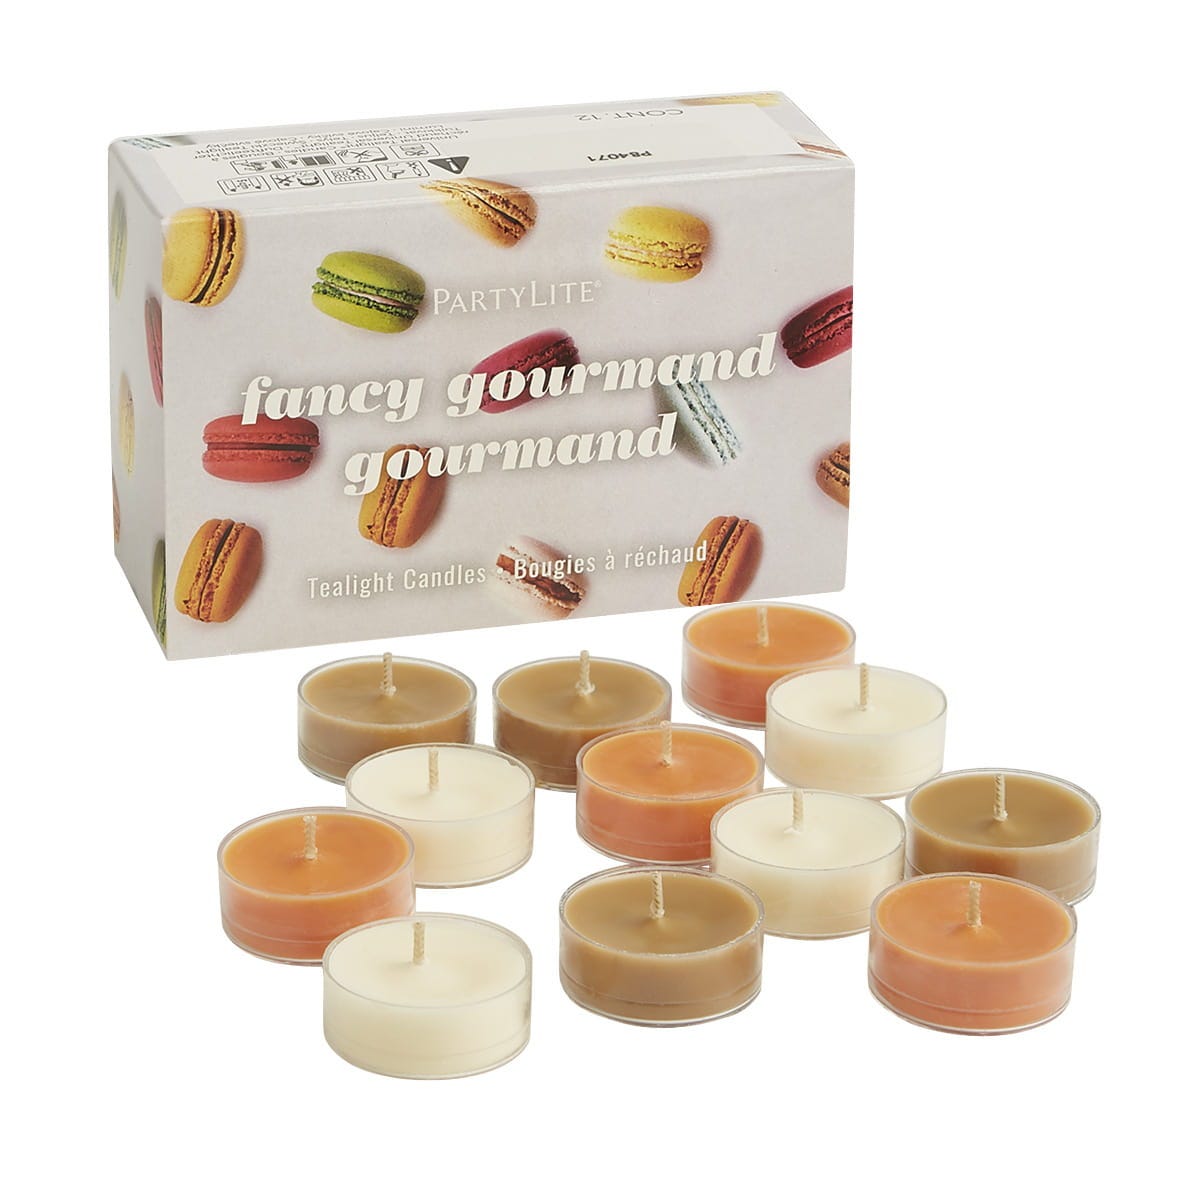 Fancy Gourmand 12-Piece Tealight Candles Sampler - PartyLite US